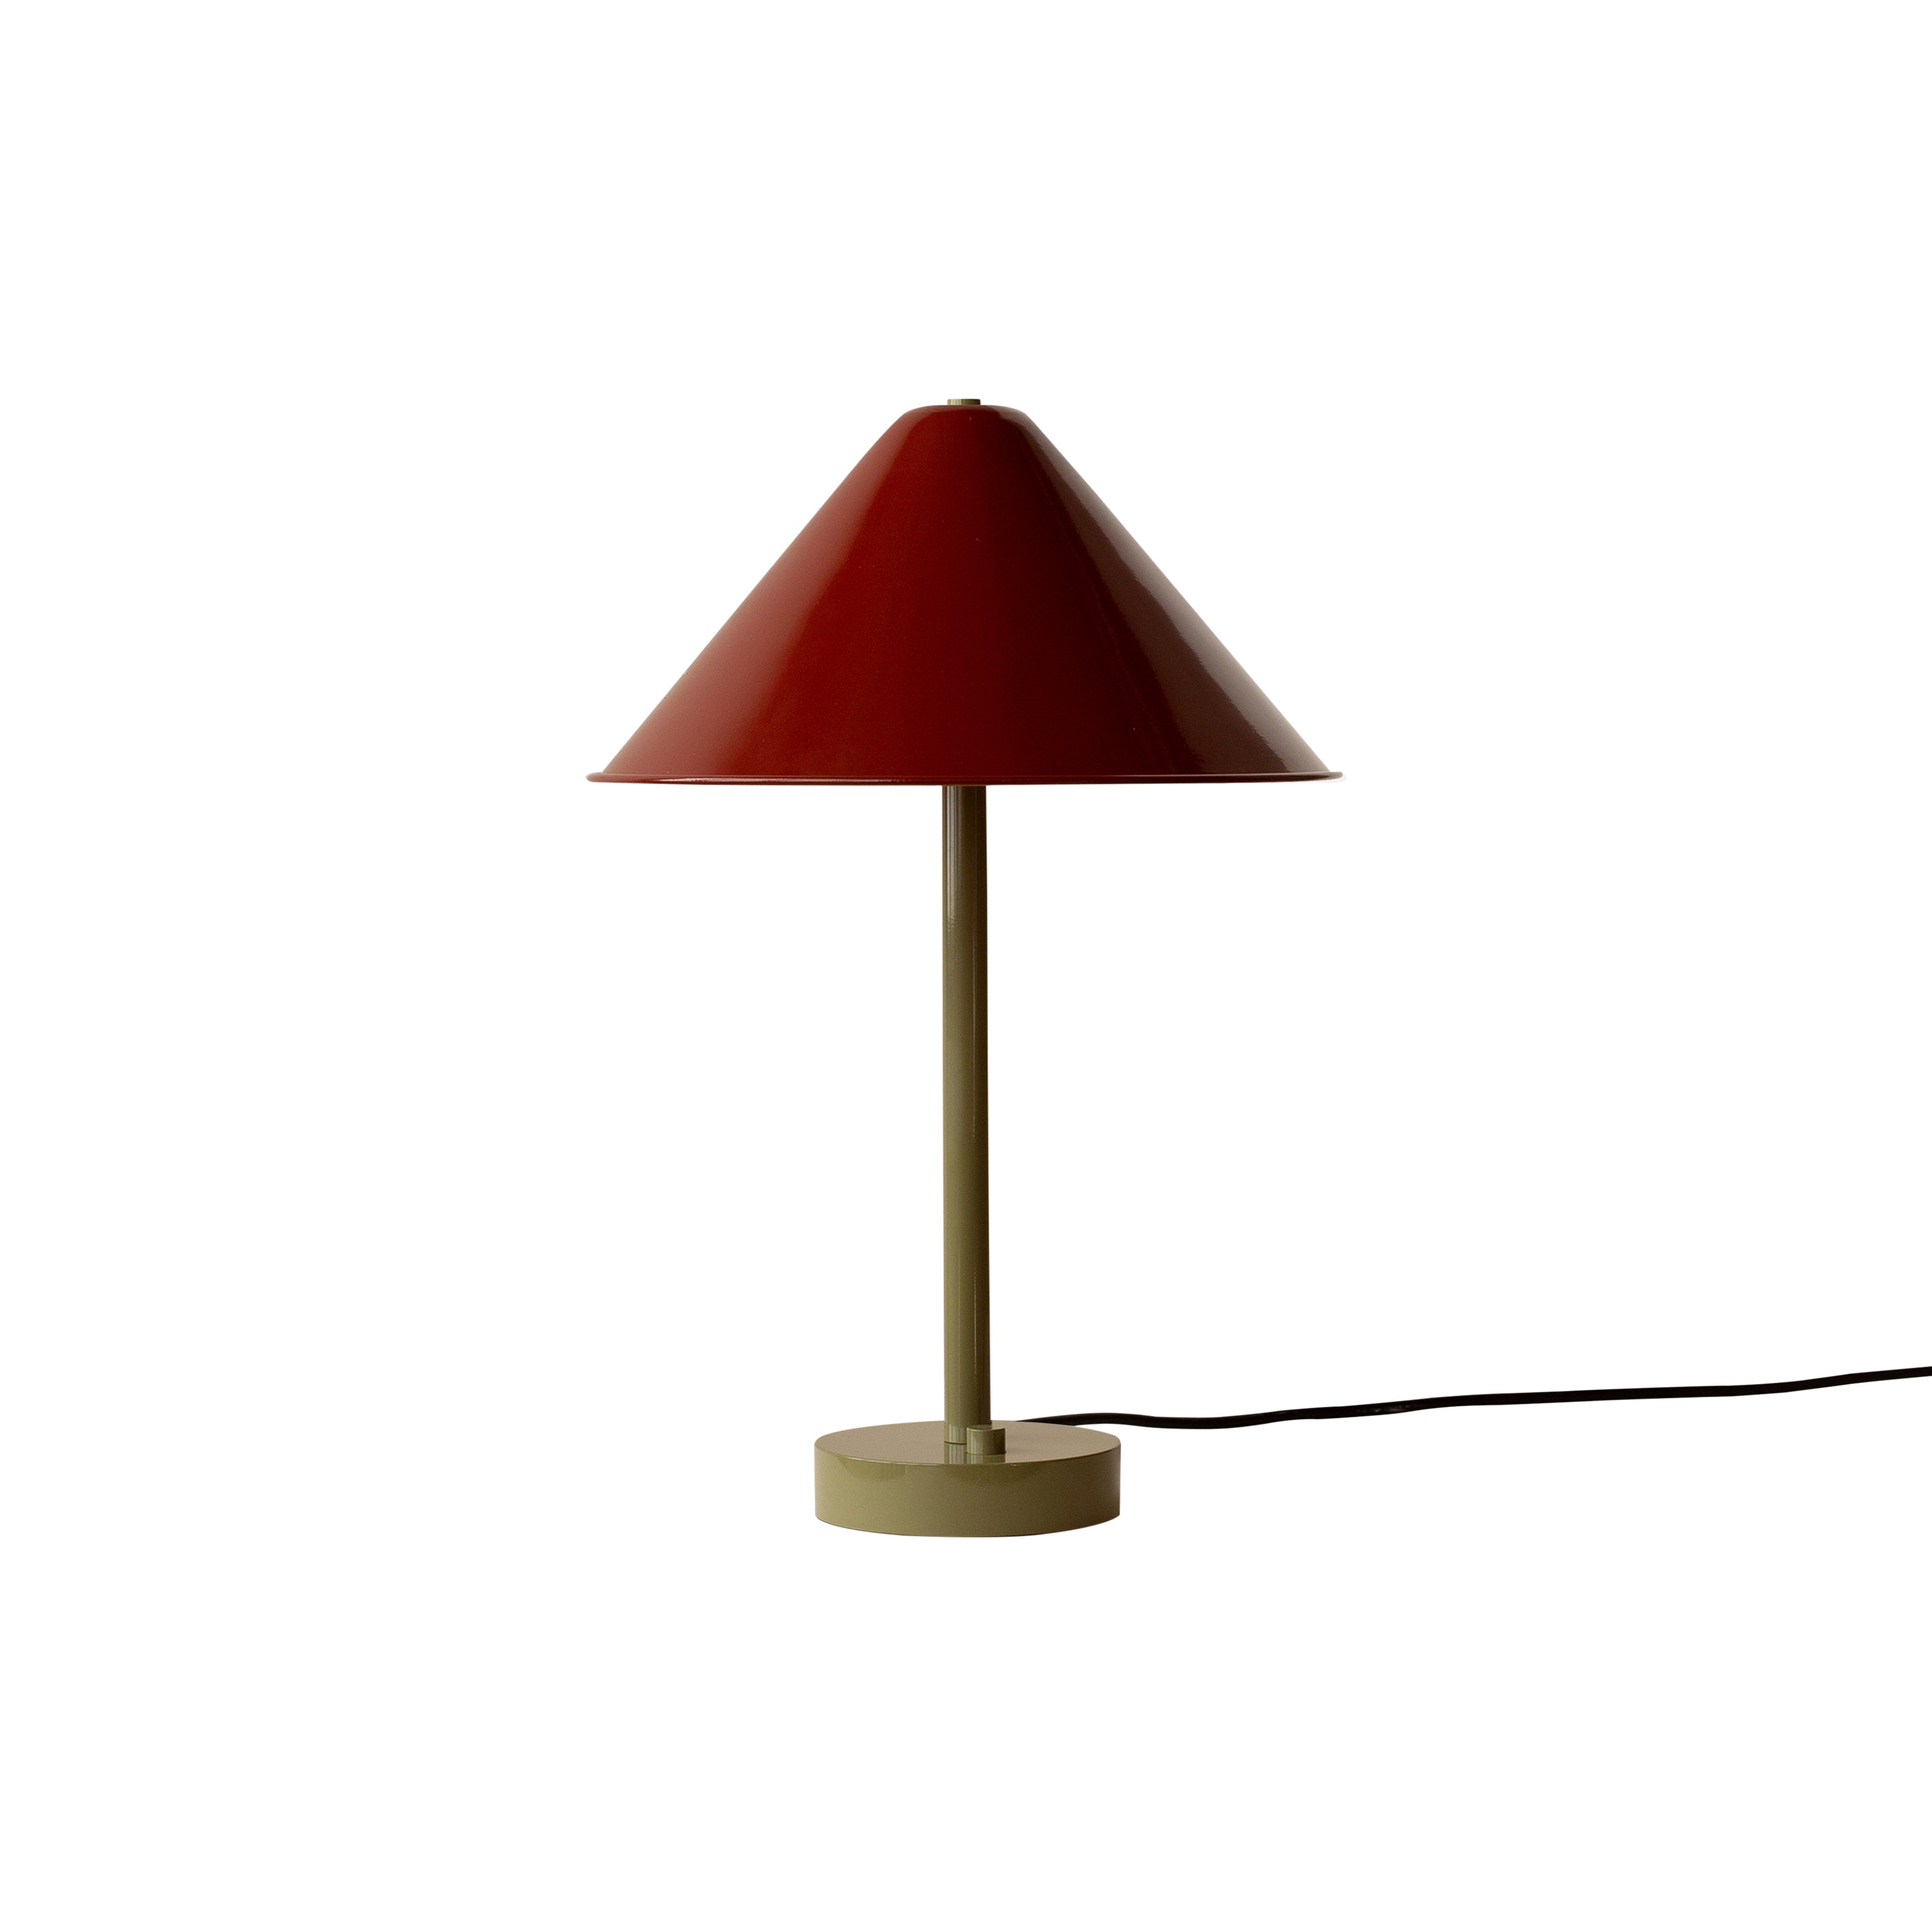 Tipi Table Lamp: Oxide Red + Reed Green